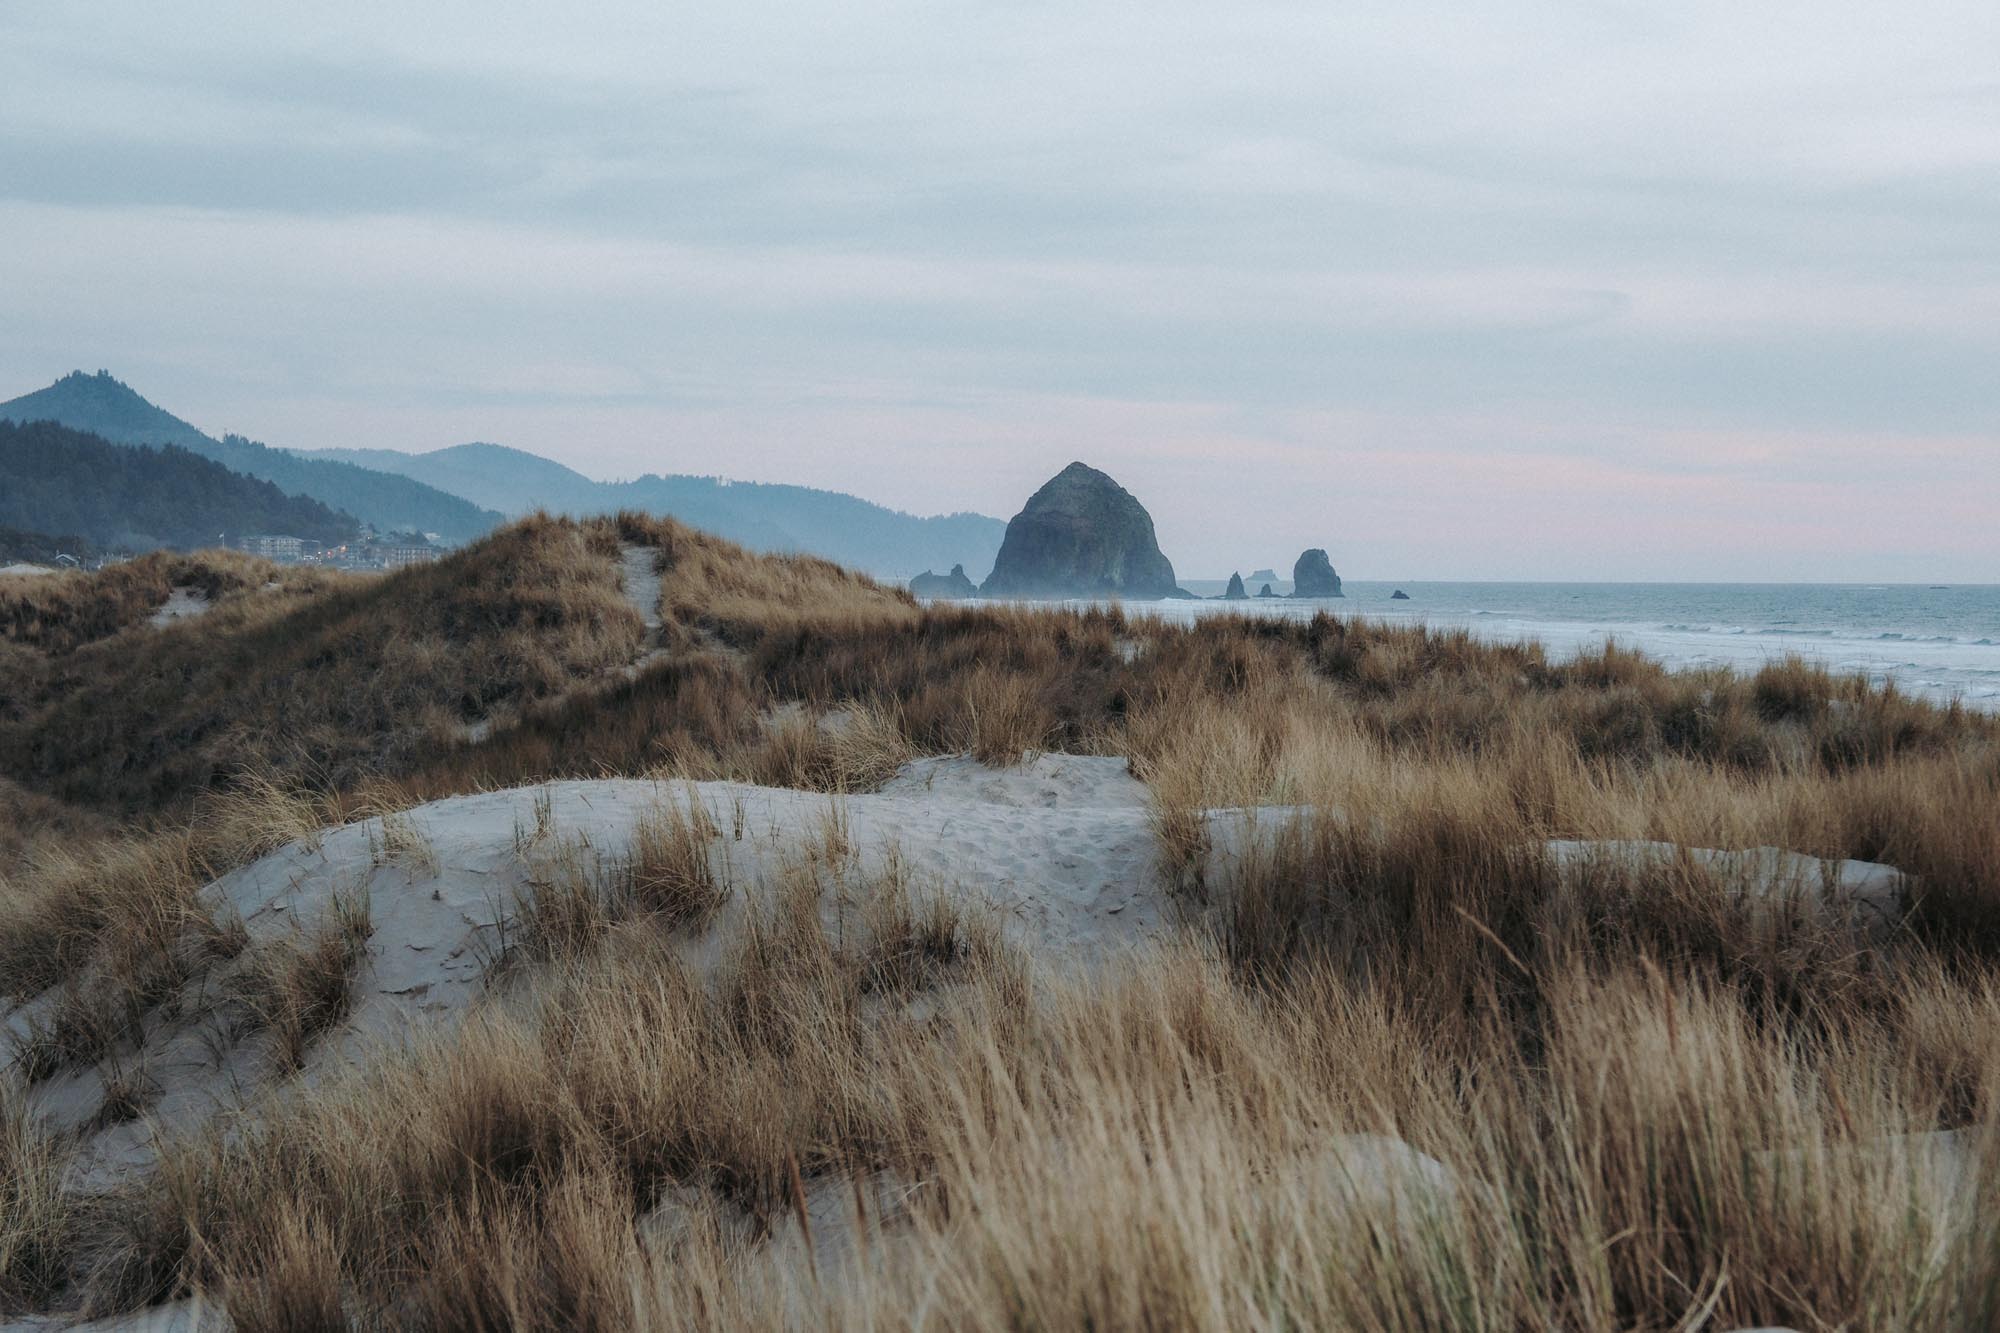 A long shot of the Oregon coast, muted and grey